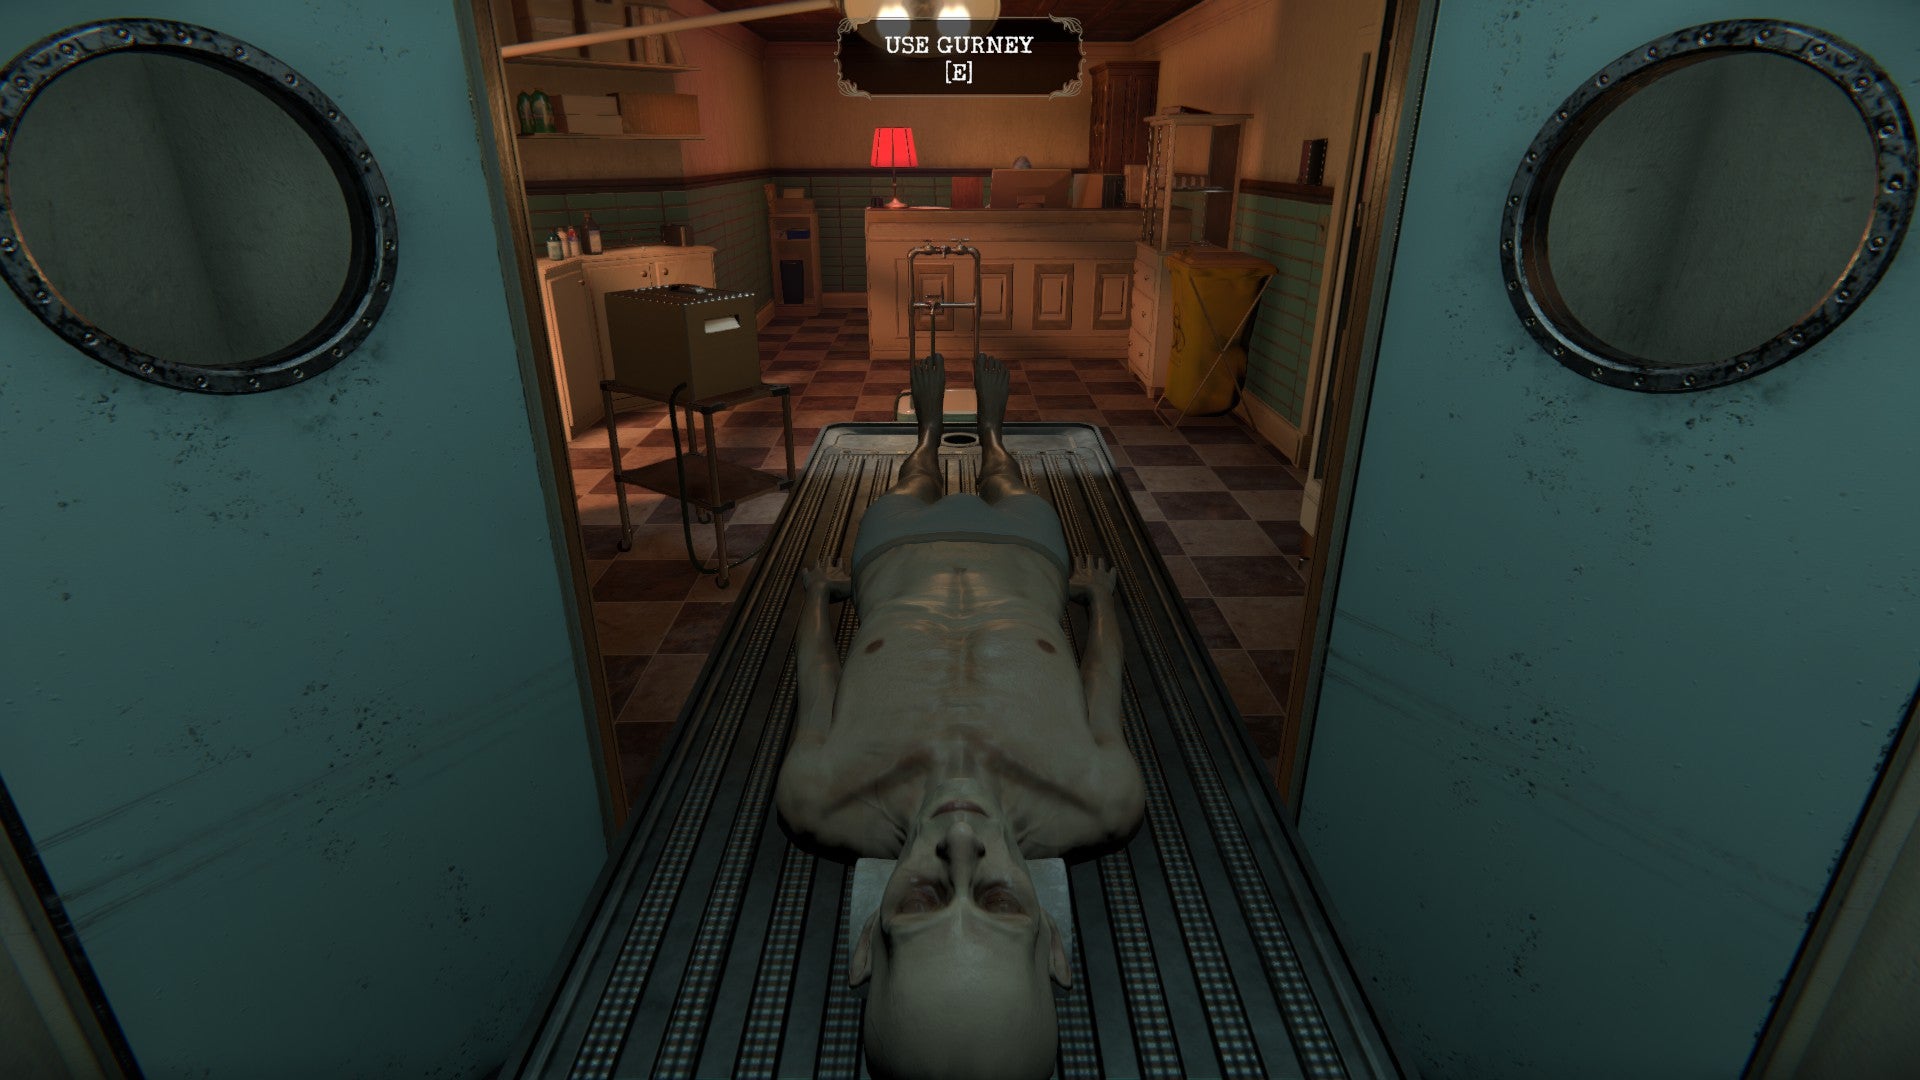 The body of an elderly man on a mortuary trolley, moving between rooms.